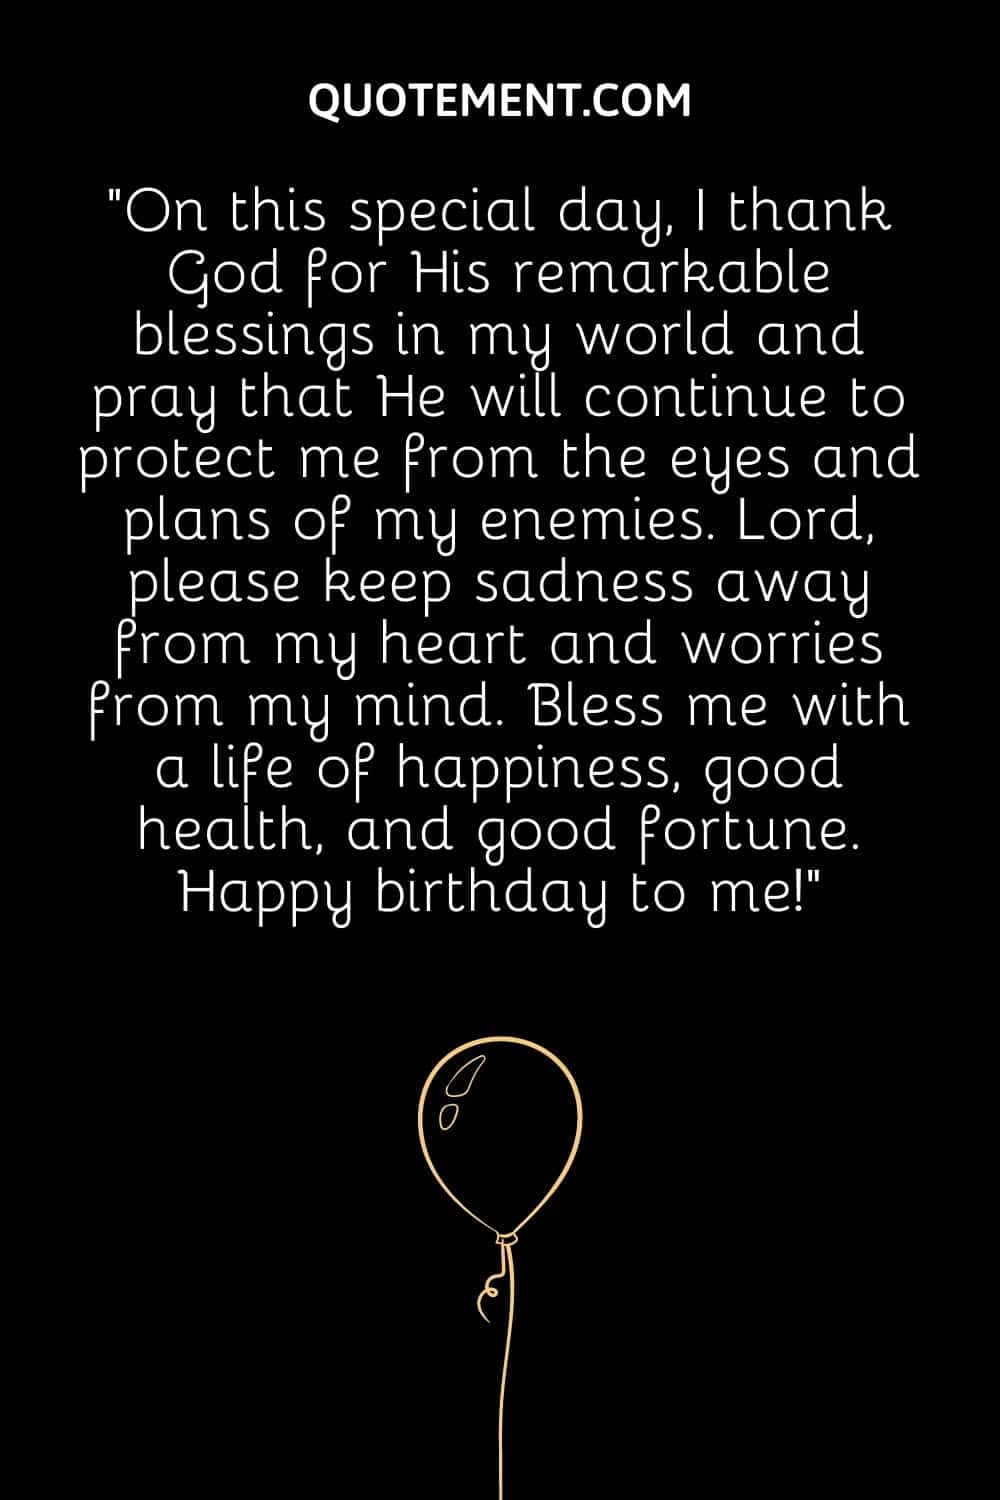 On this special day, I thank God for His remarkable blessings in my world and pray that He will continue to protect me from the eyes and plans of my enemies